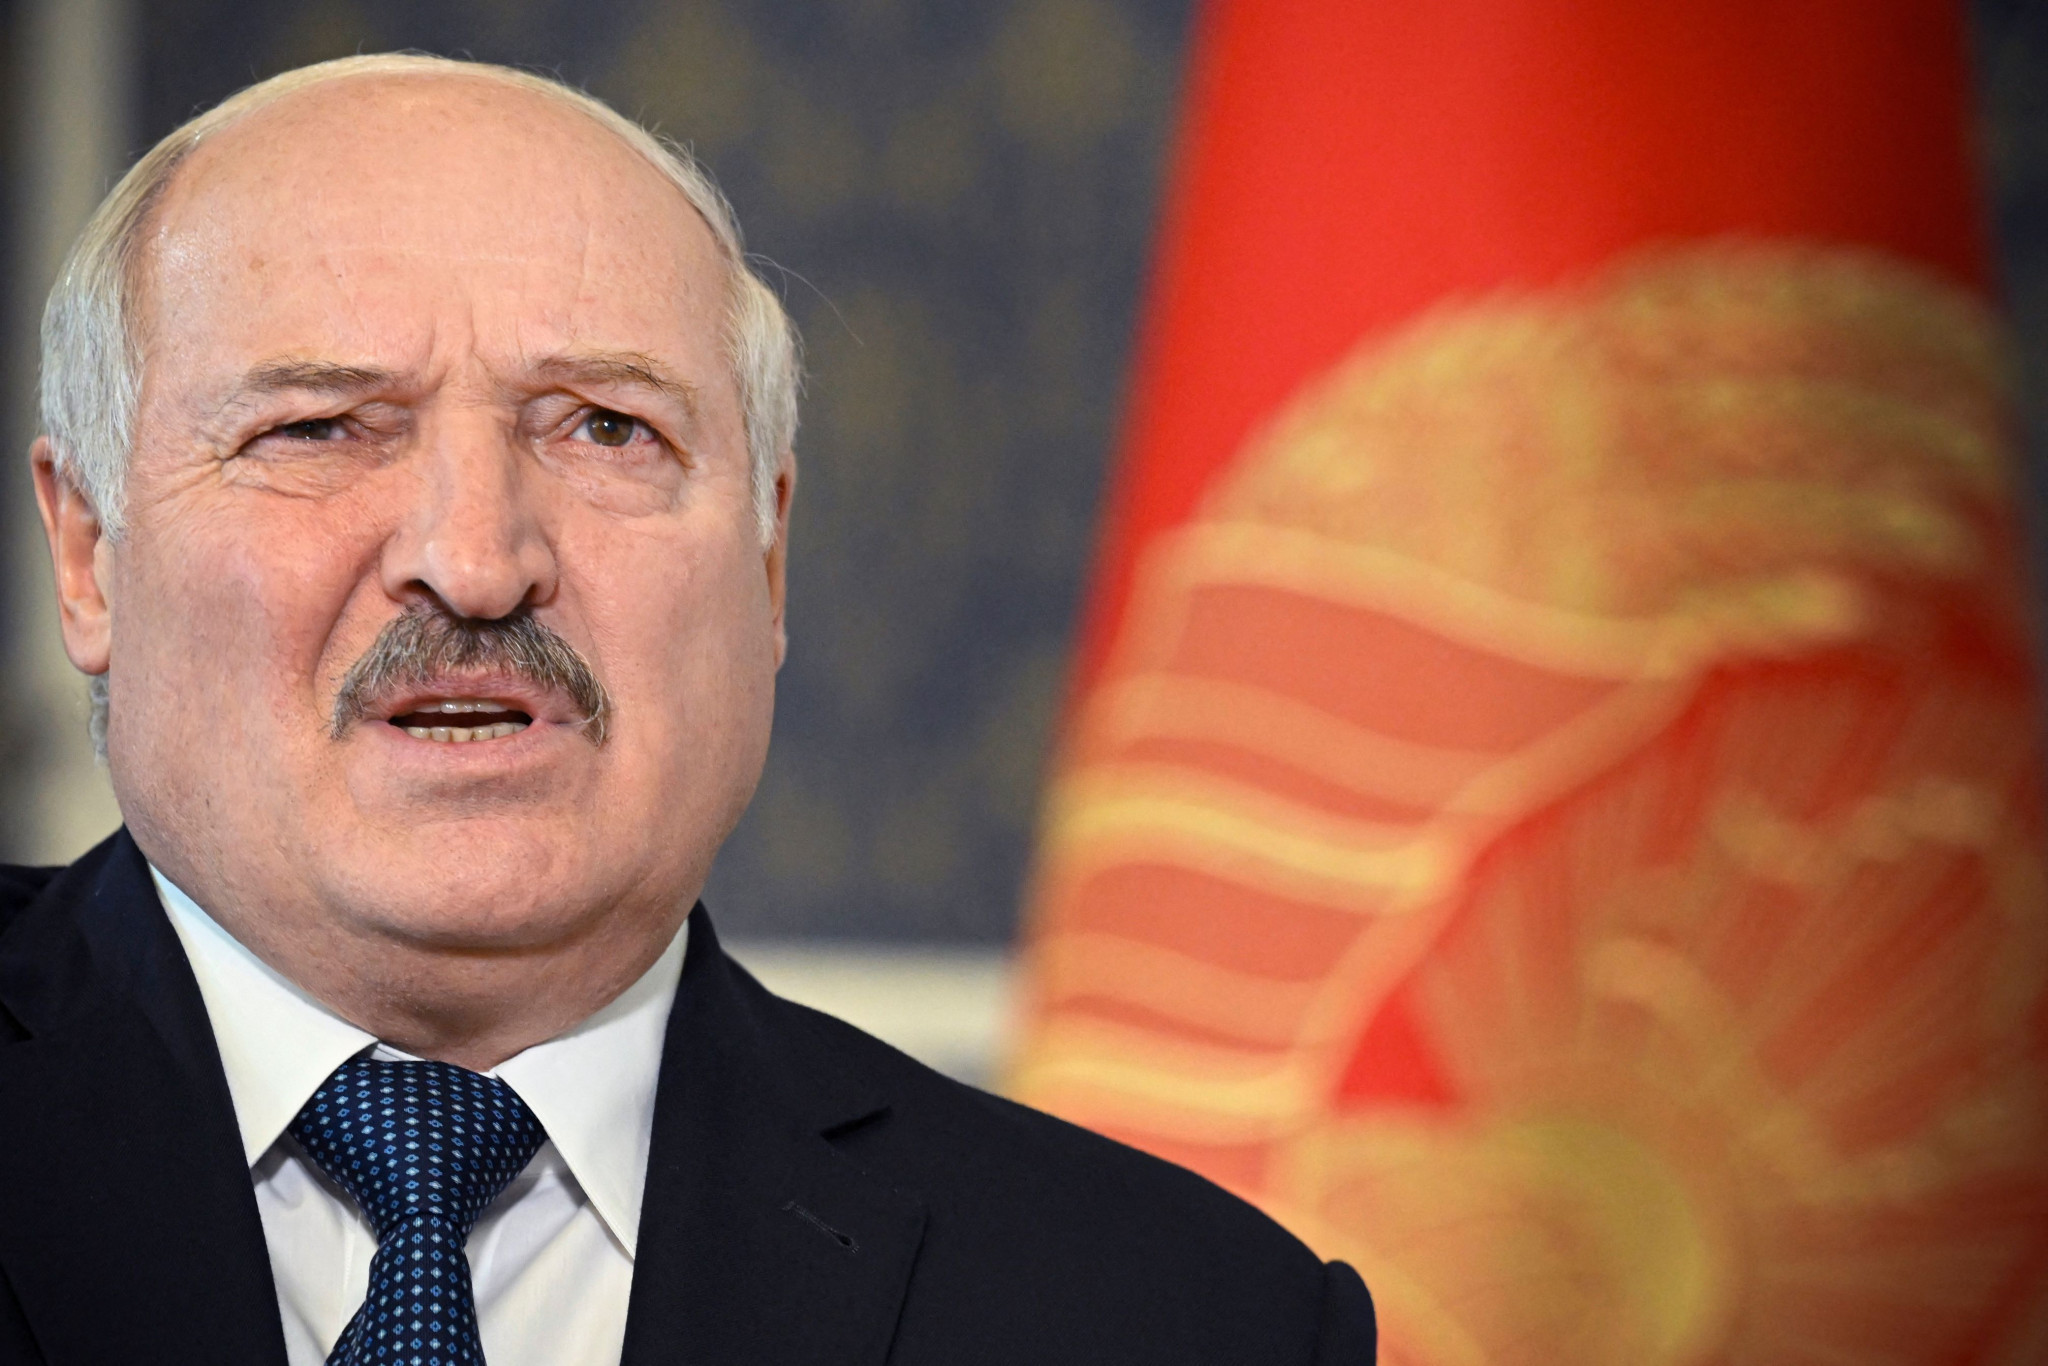 Belarus President Alexander Lukashenko had also been NOCRB President before he was succeeded by his son ©Getty Images